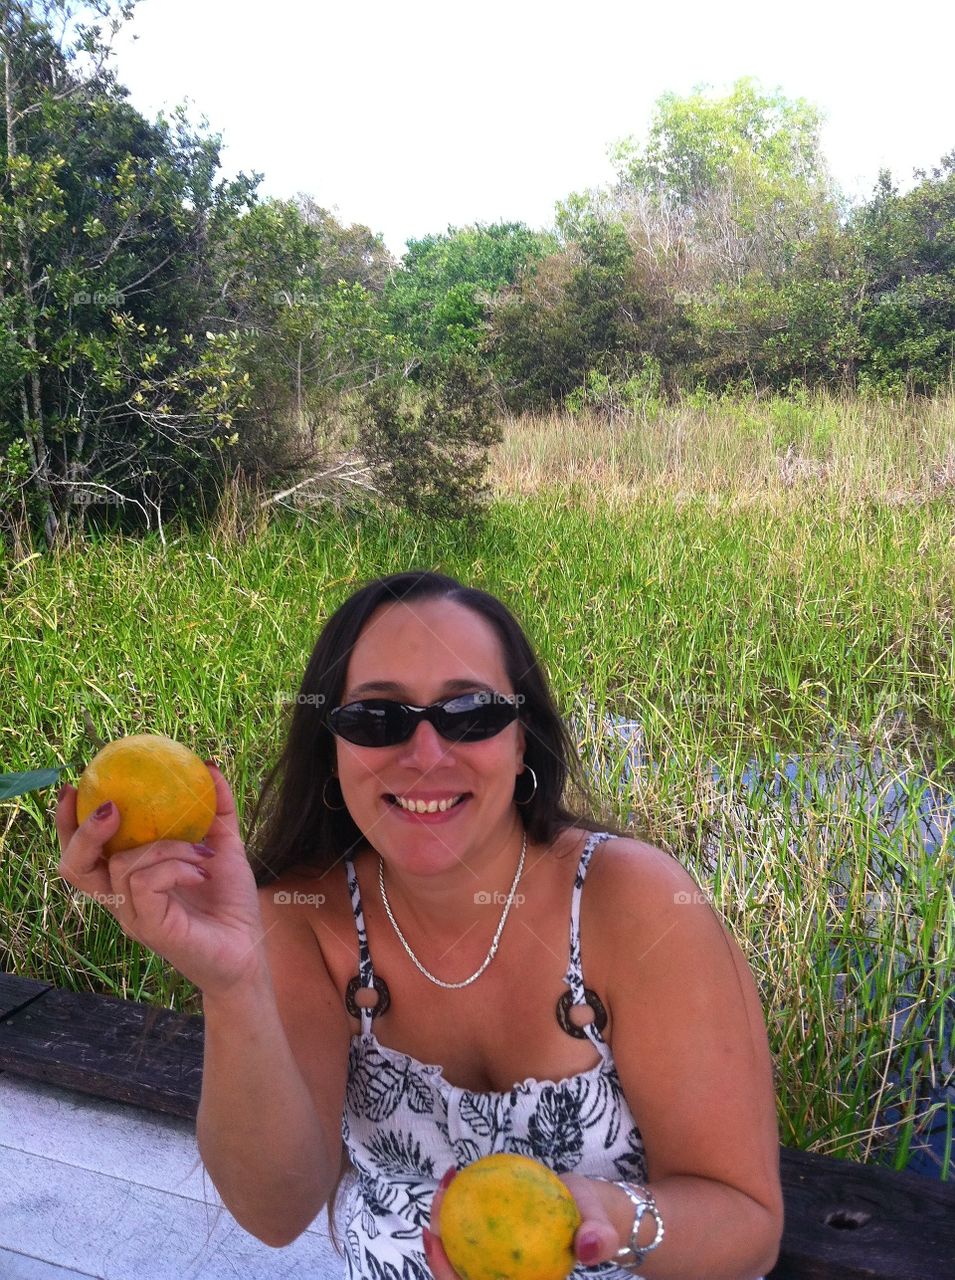 Girl Showing Off Oranges in Florida